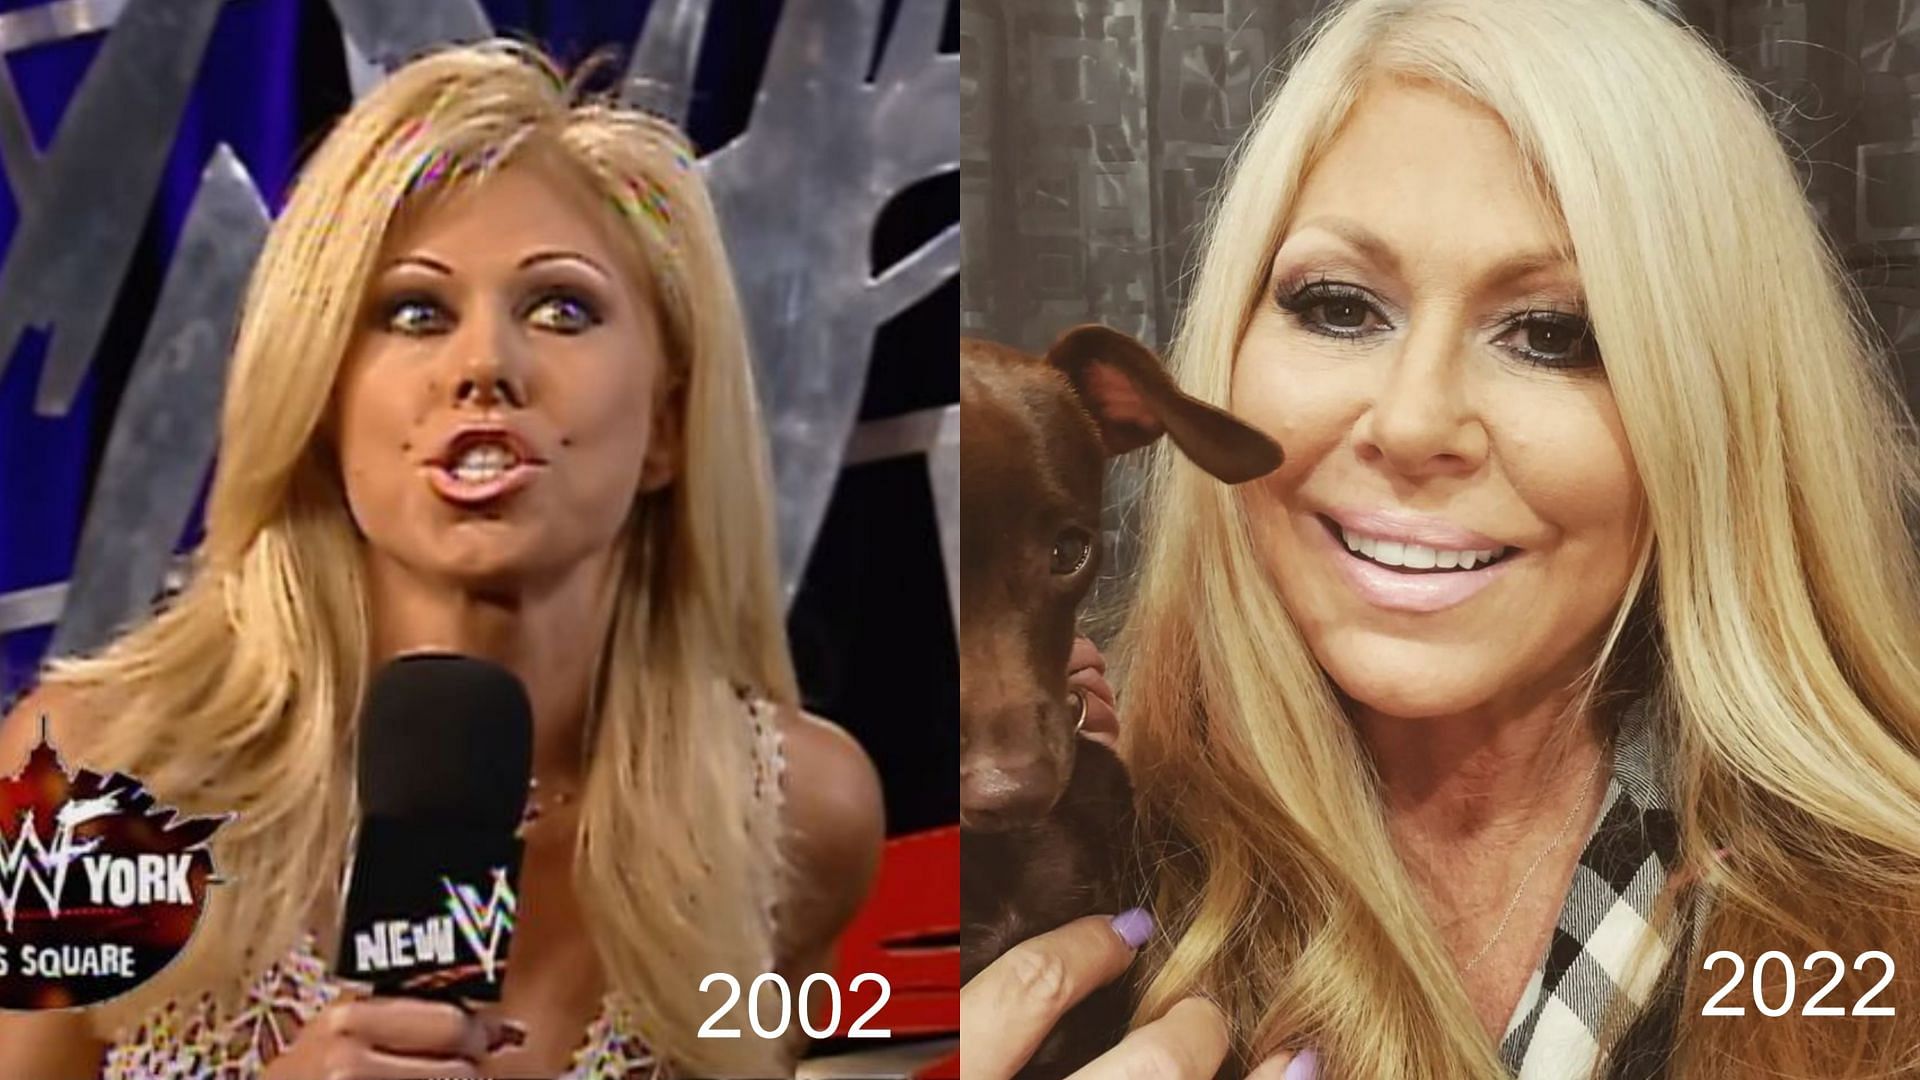 Terri Runnels competed in a few matches in 2002